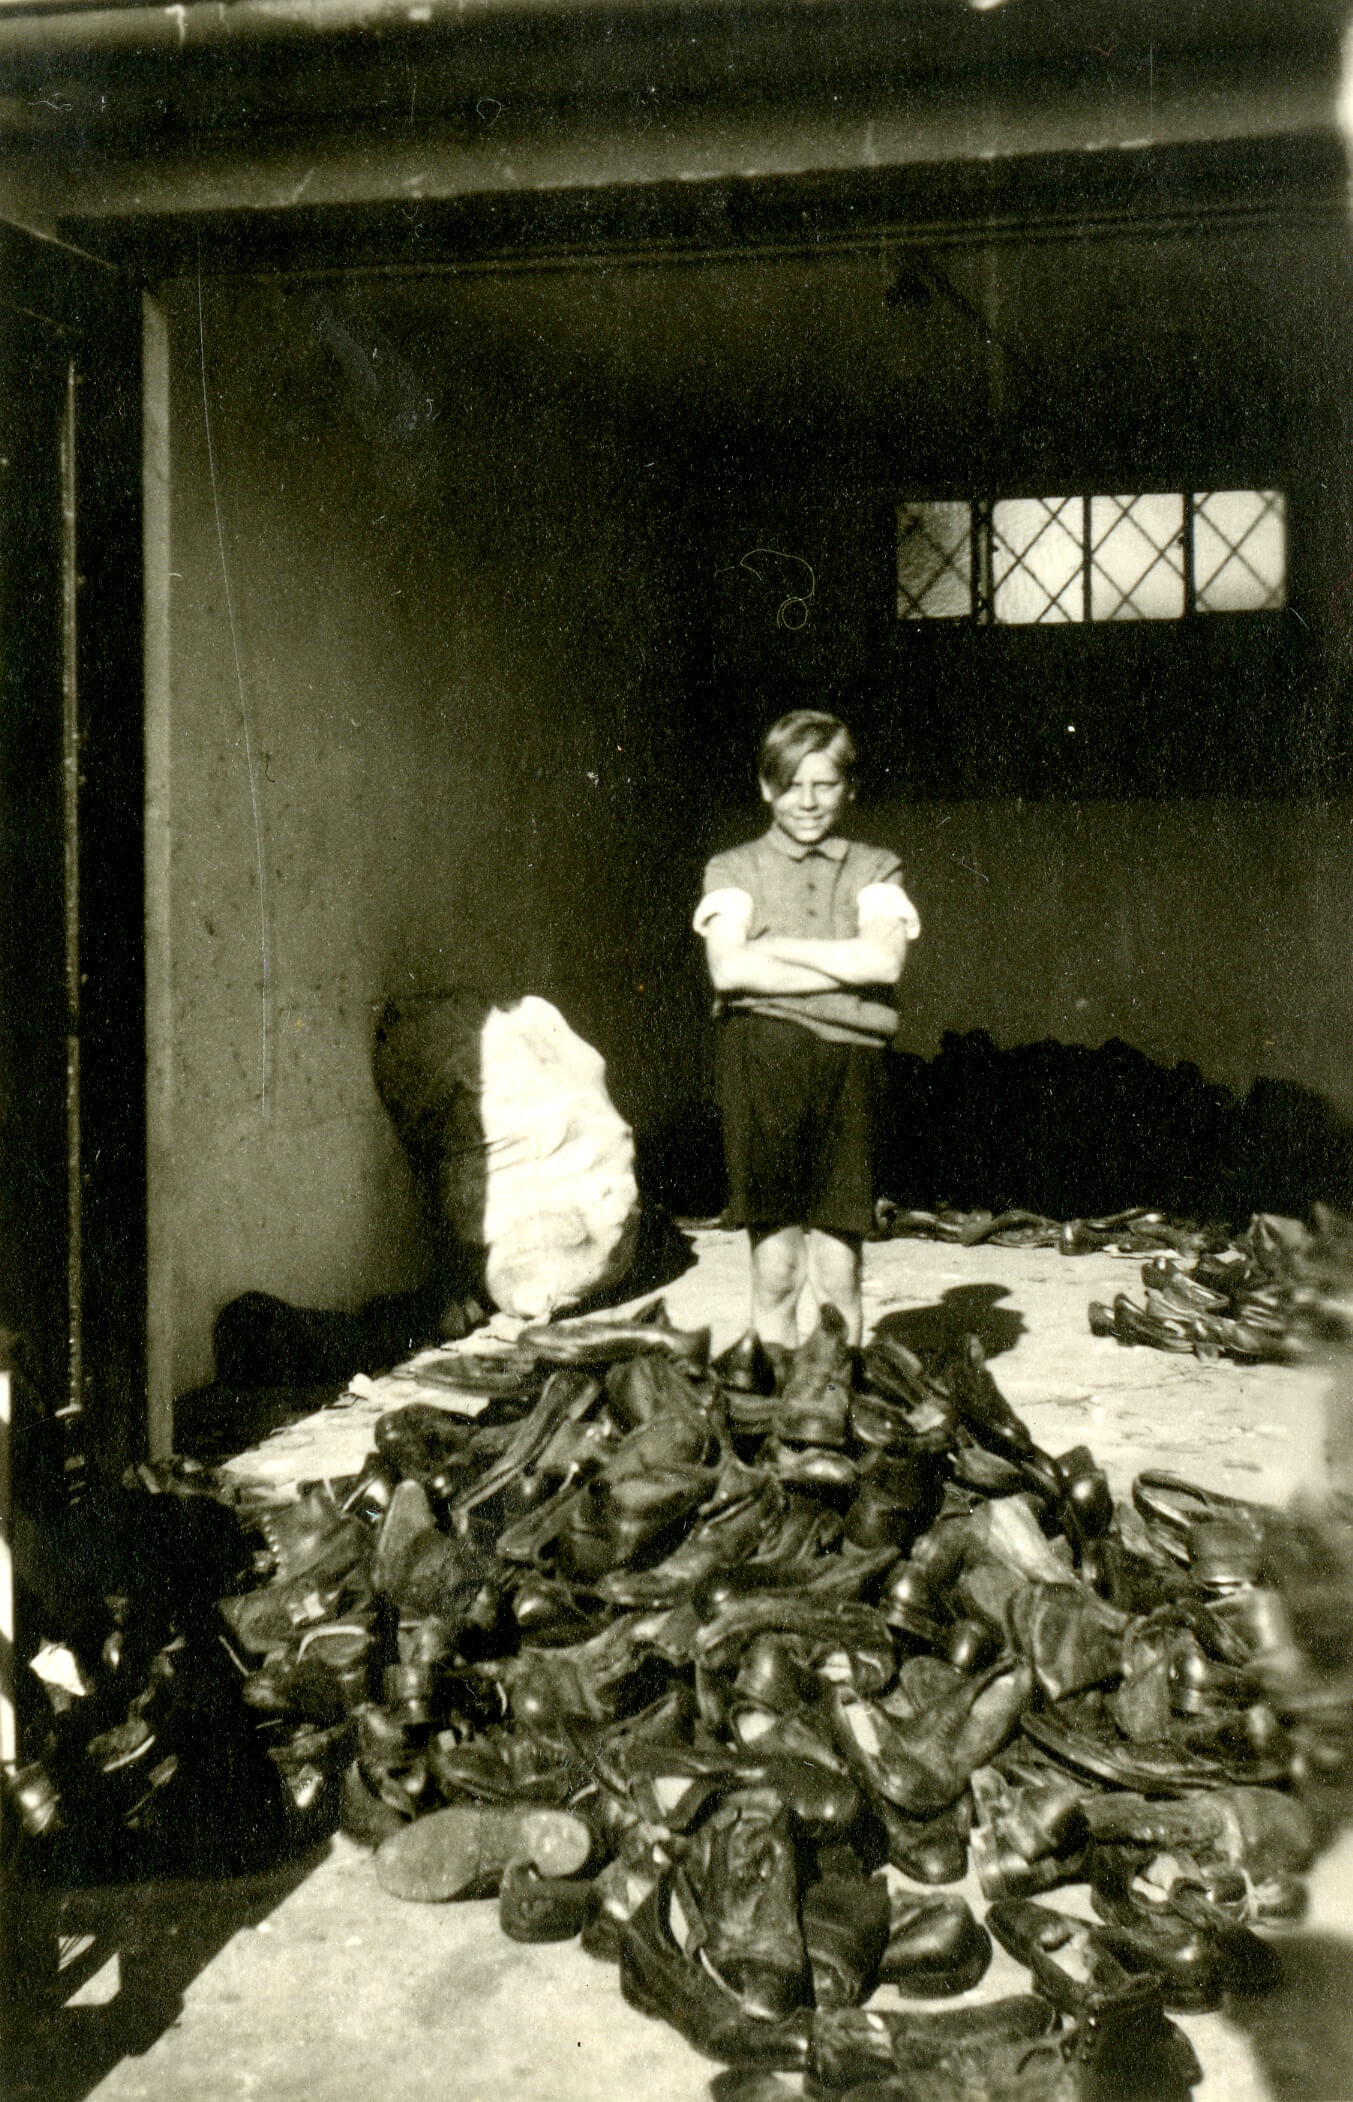 Black and white photo of a young person, arms crossed, standing behind a large pile of shoes